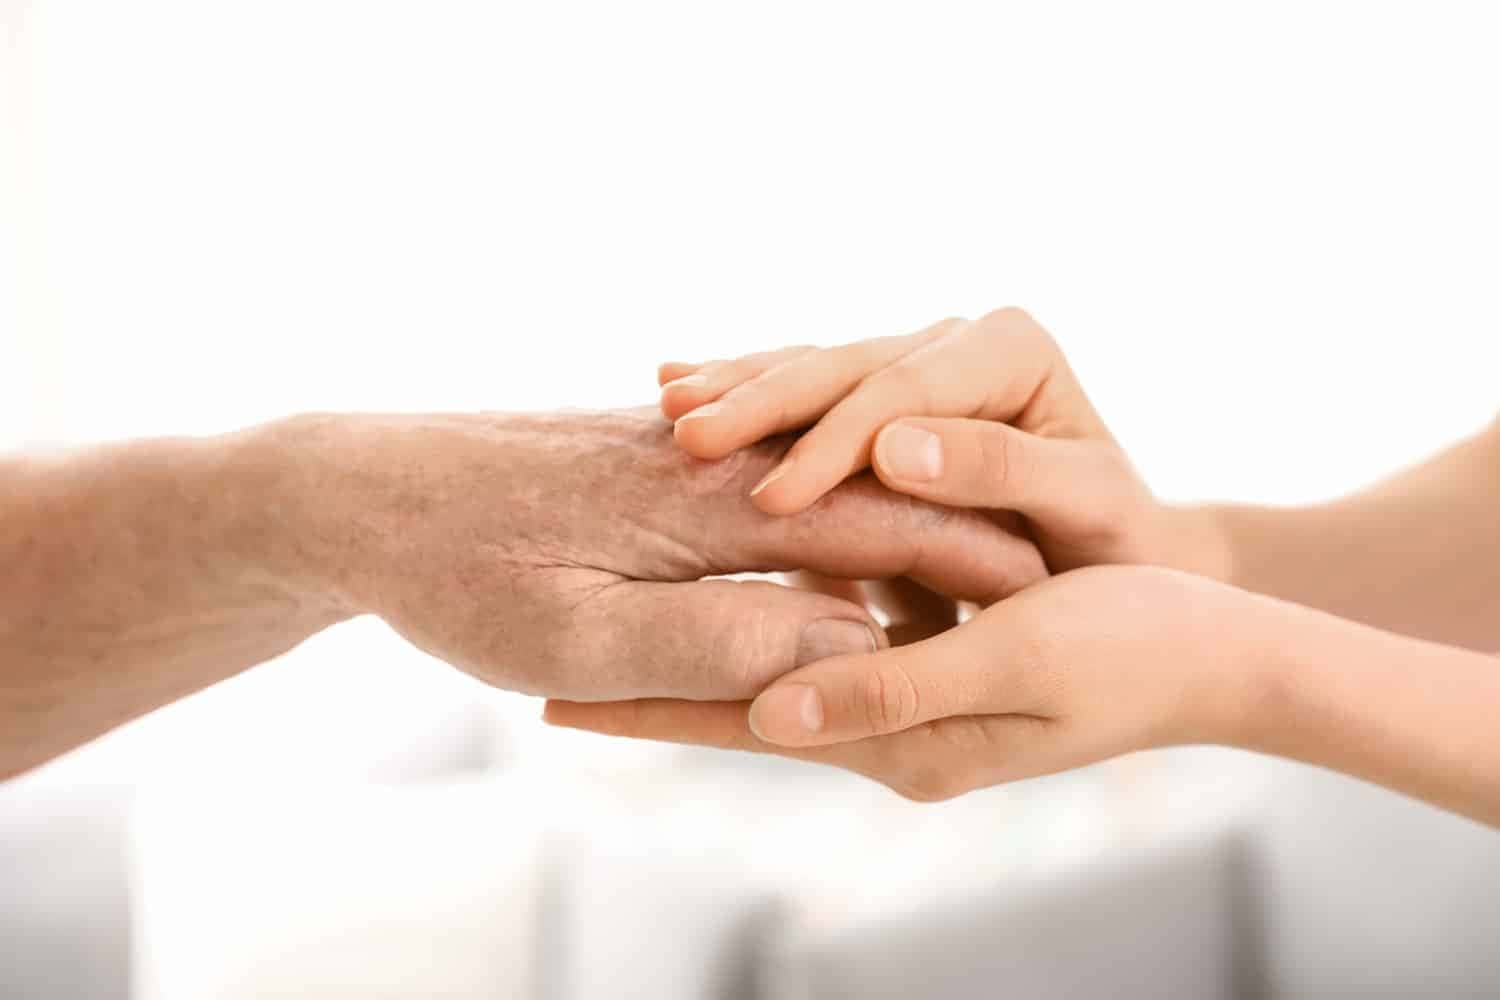 A gentle younger hand holding an older one, symbolising support and compassion across generations with our home care services.